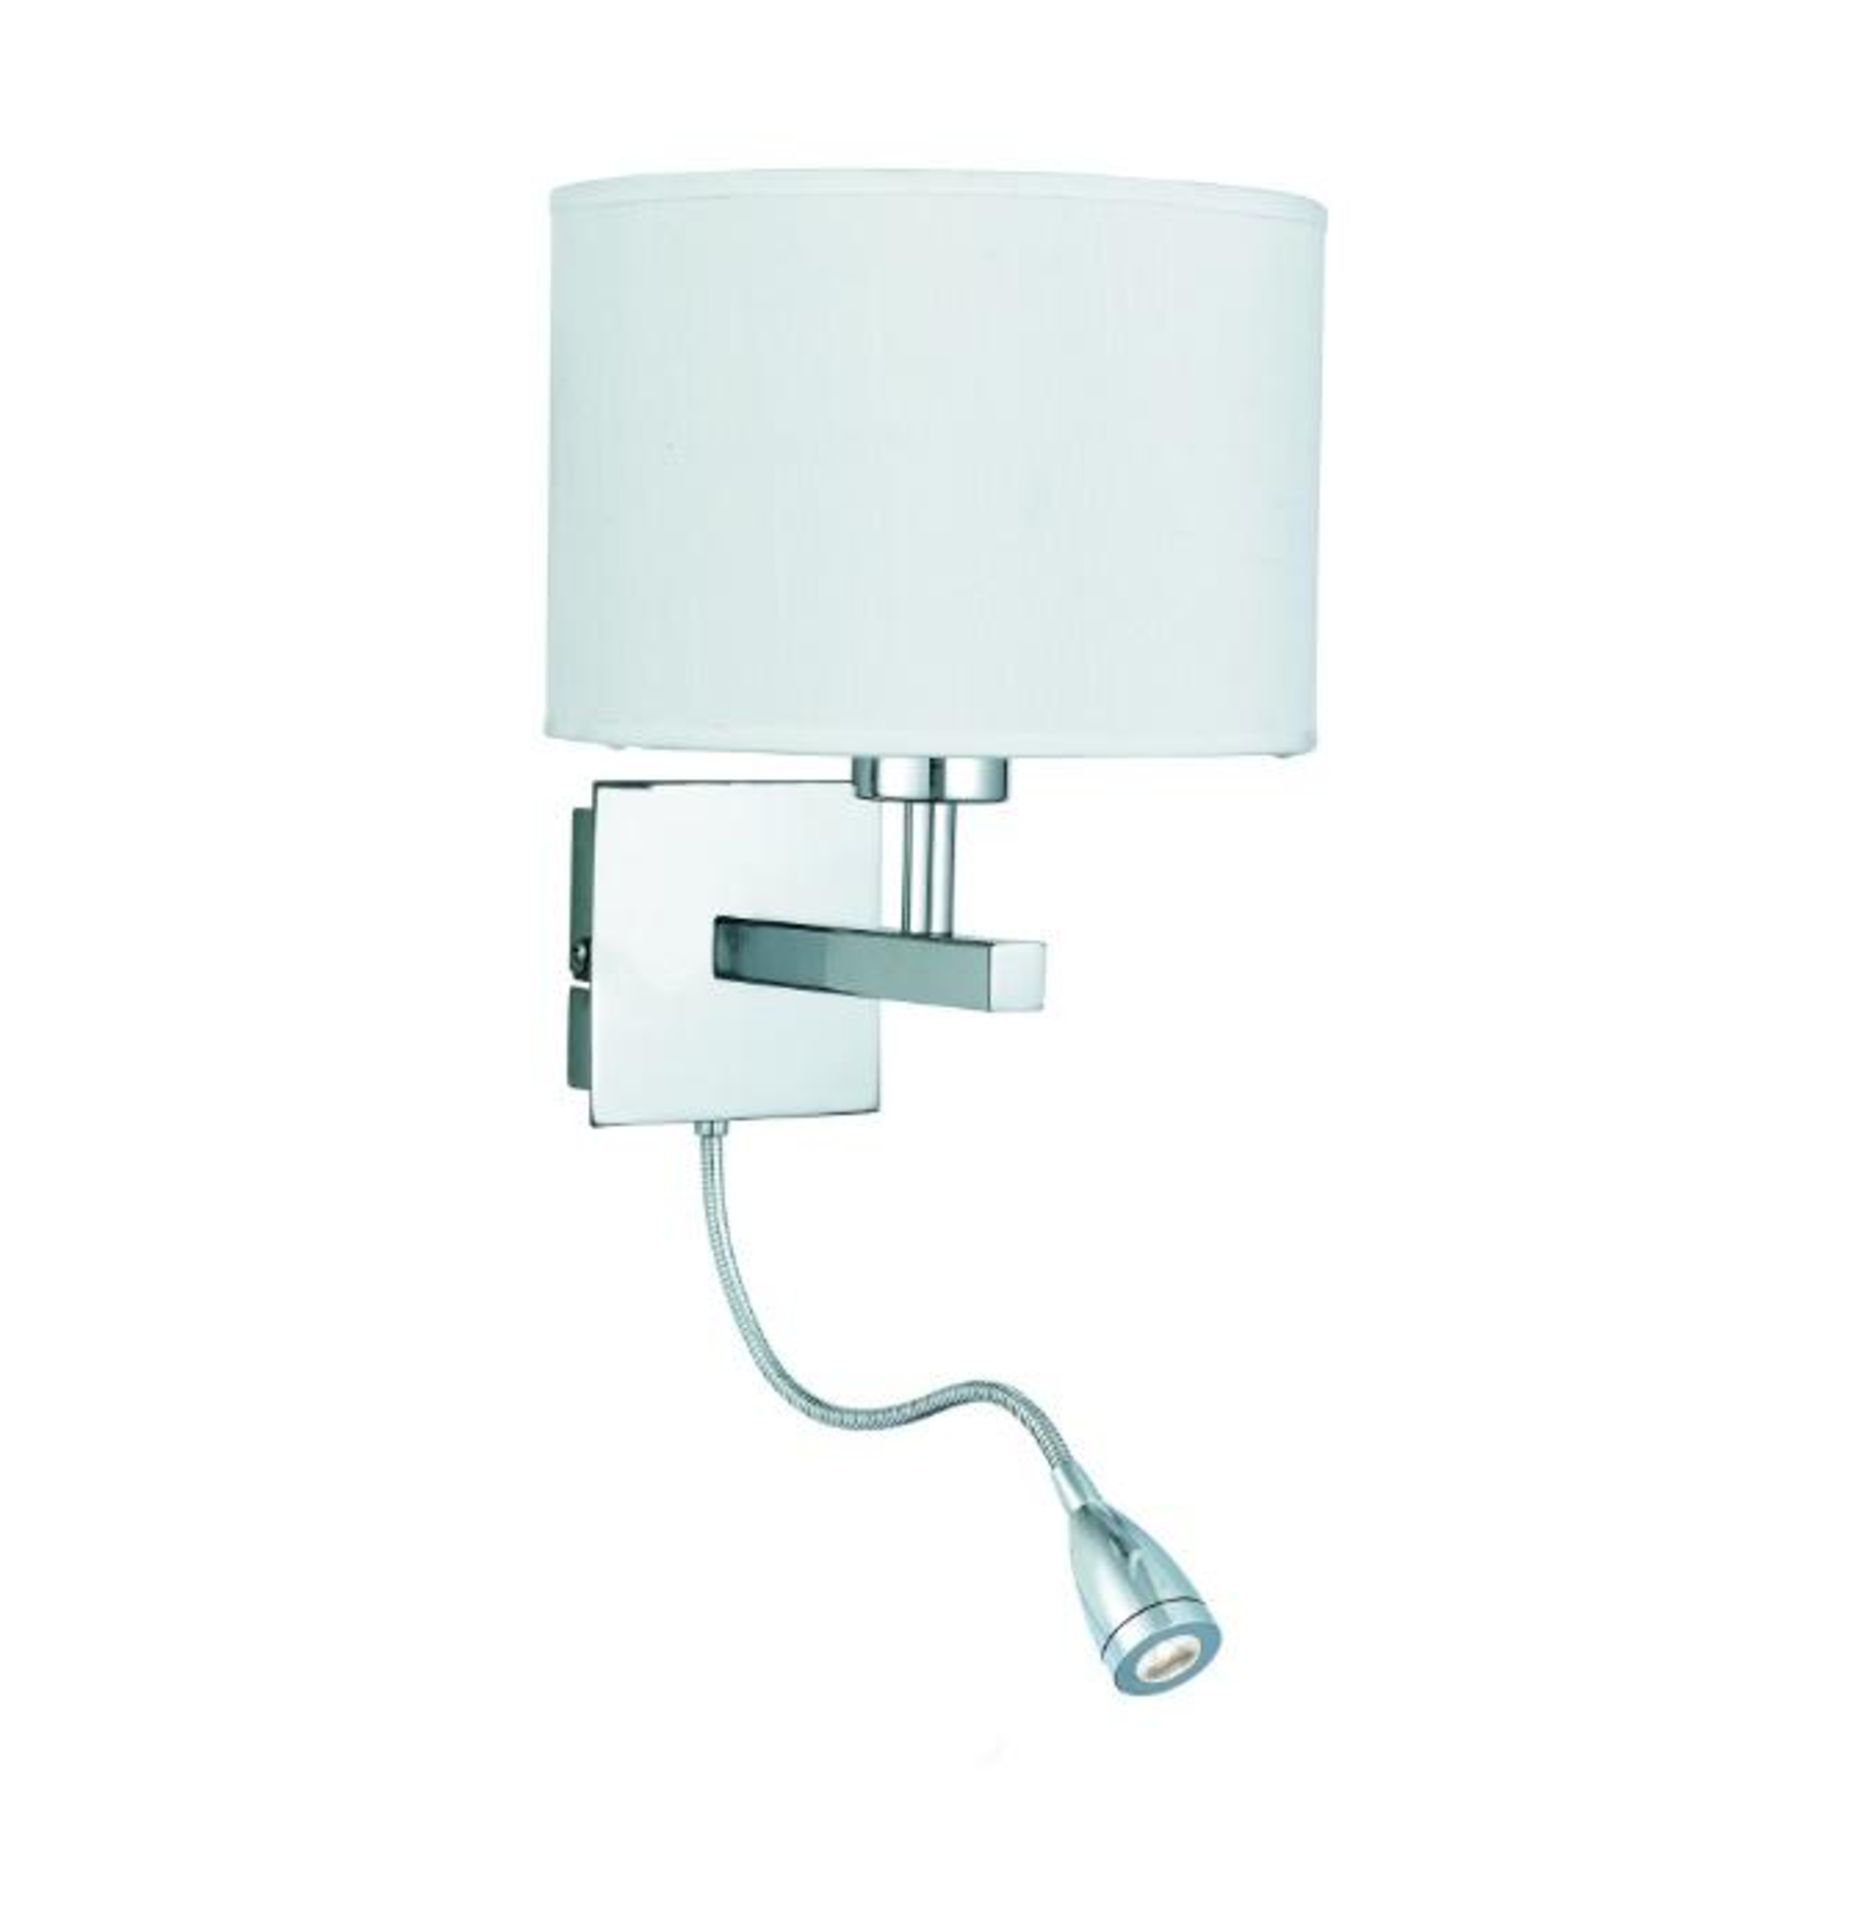 1 x Chrome Wall Light With White Shade Incorporating LED Flexi-Arm - Ex Display Stock - CL323 - Ref: